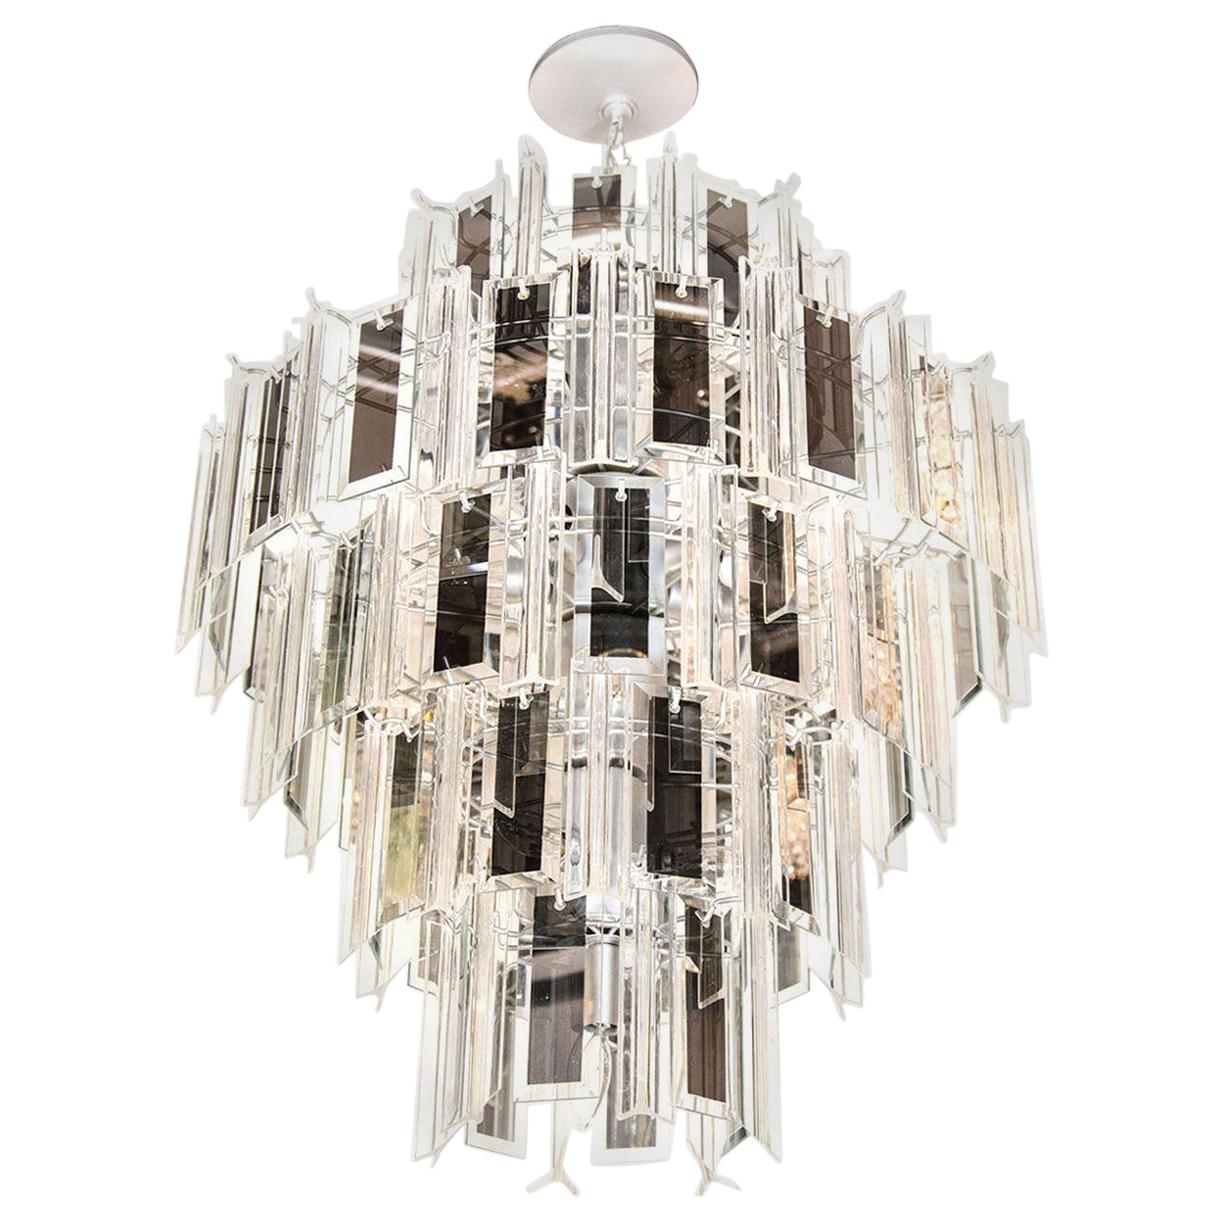 Mid-Century Modern Lucite and Mirrored Prism Chandelier, Italy, circa 1970s